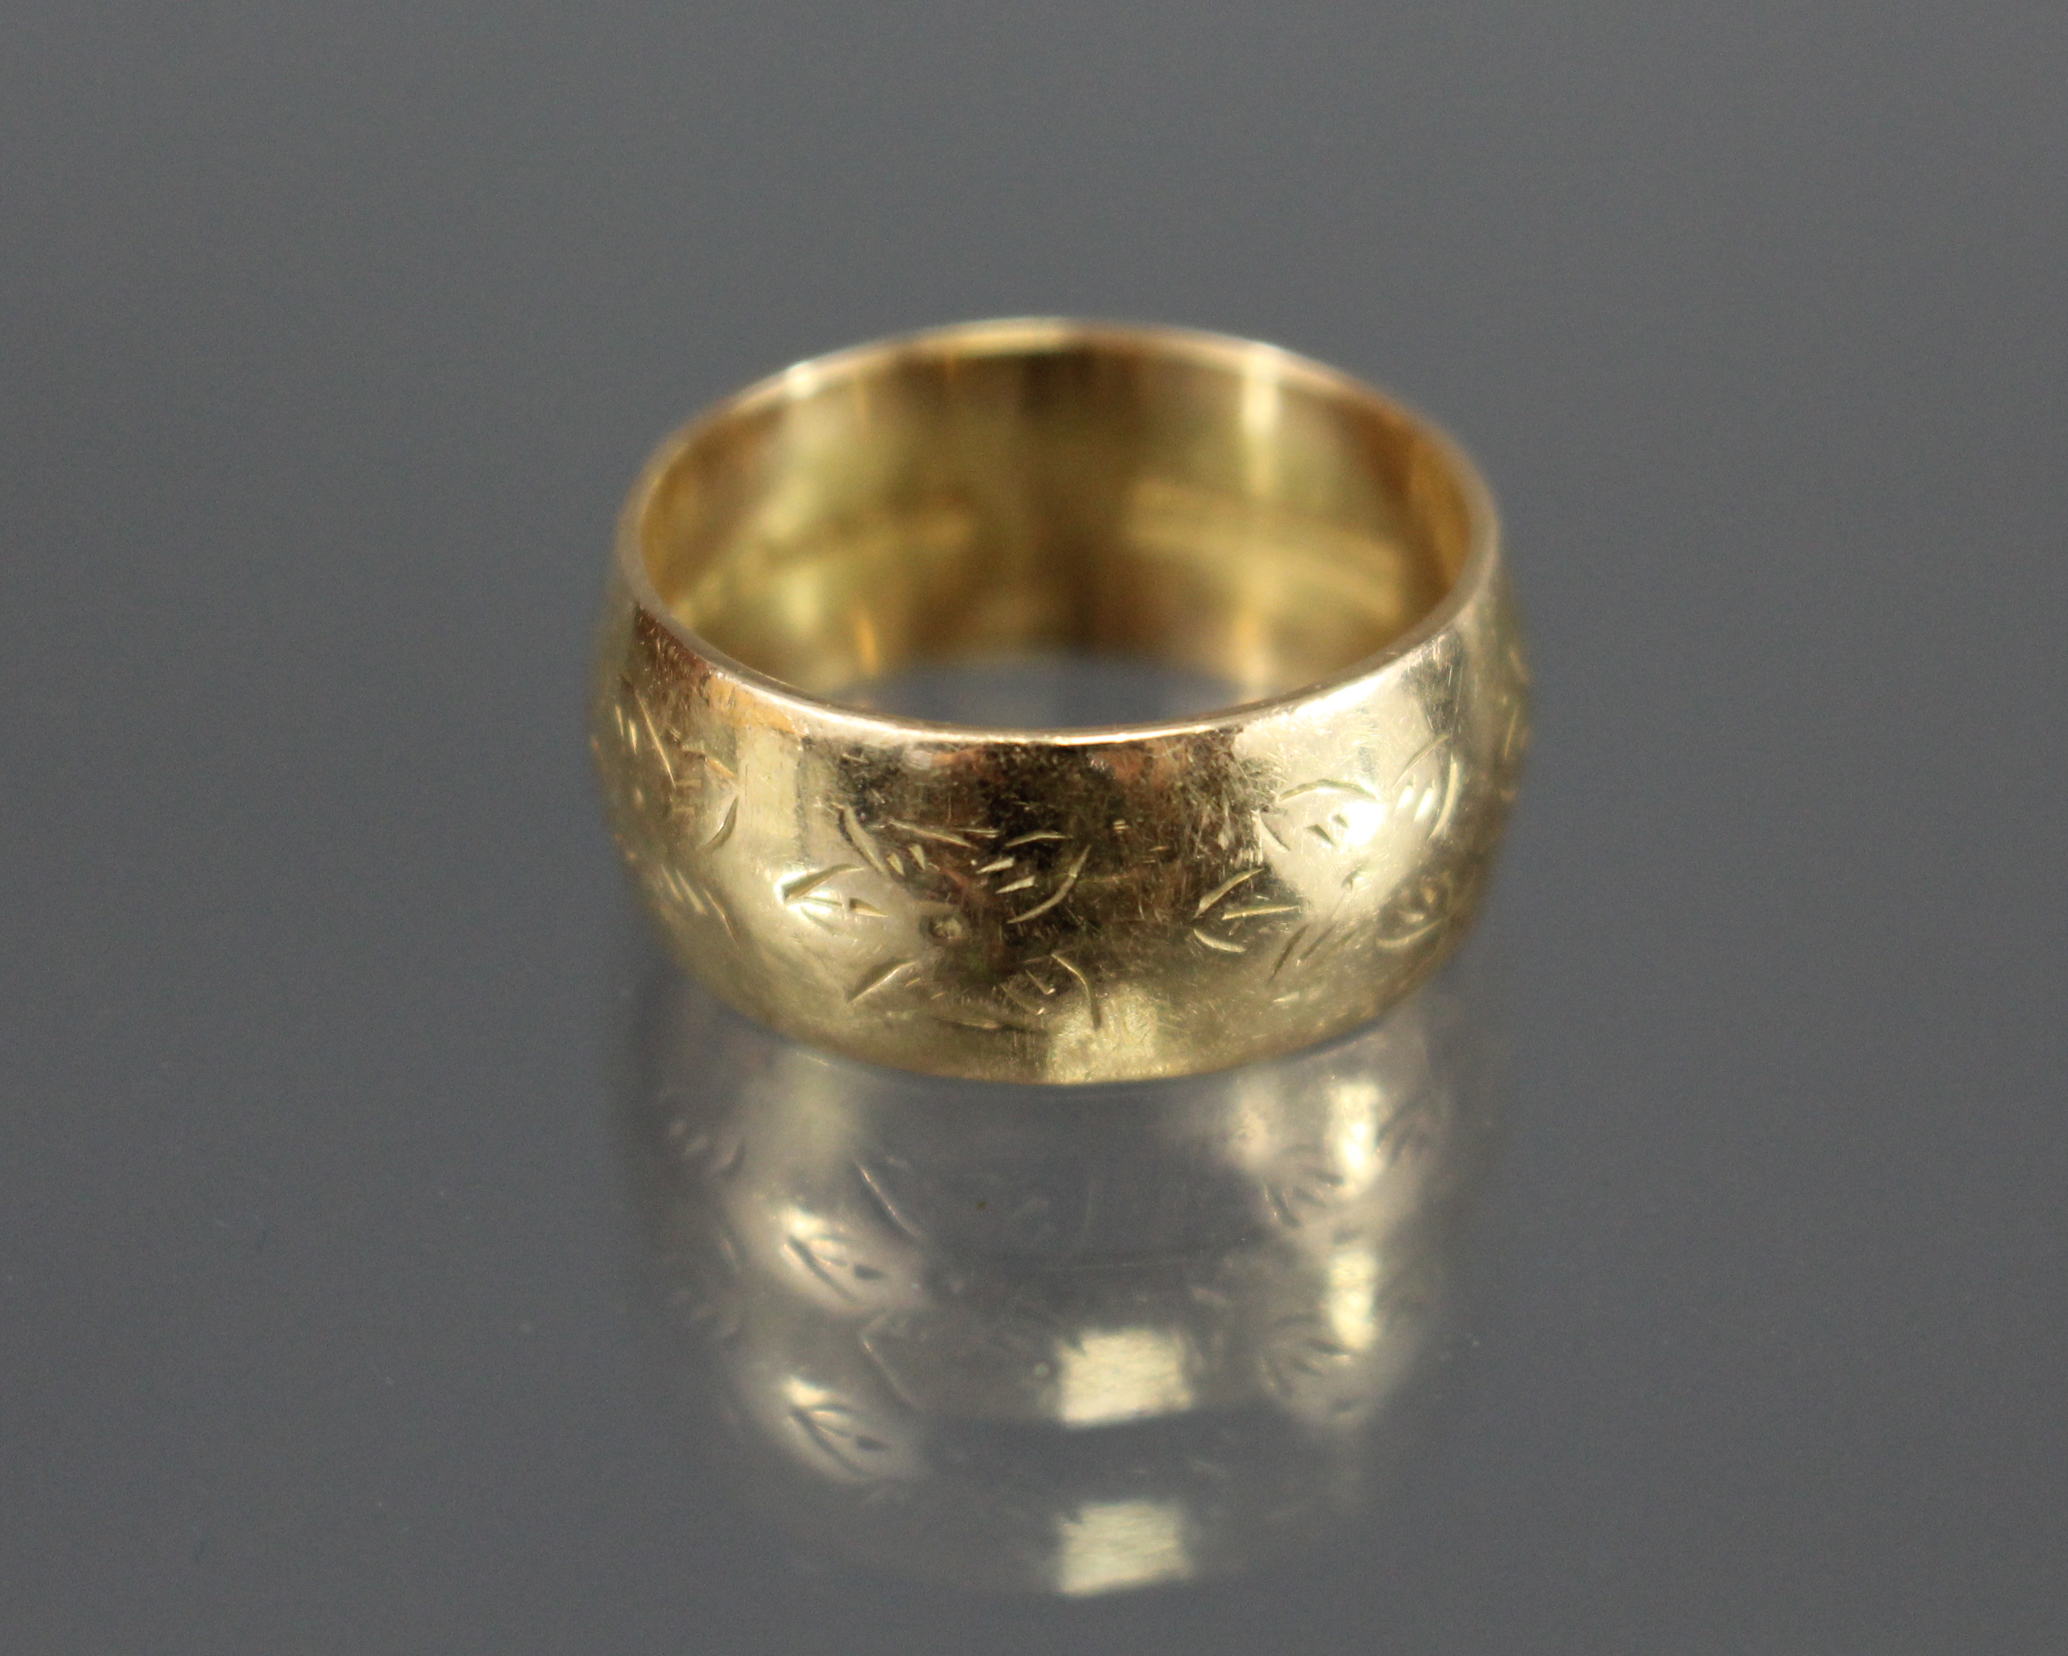 An 18ct. gold wedding band with engraved flower-head design; Birmingham hallmarks for 1991. (Size: